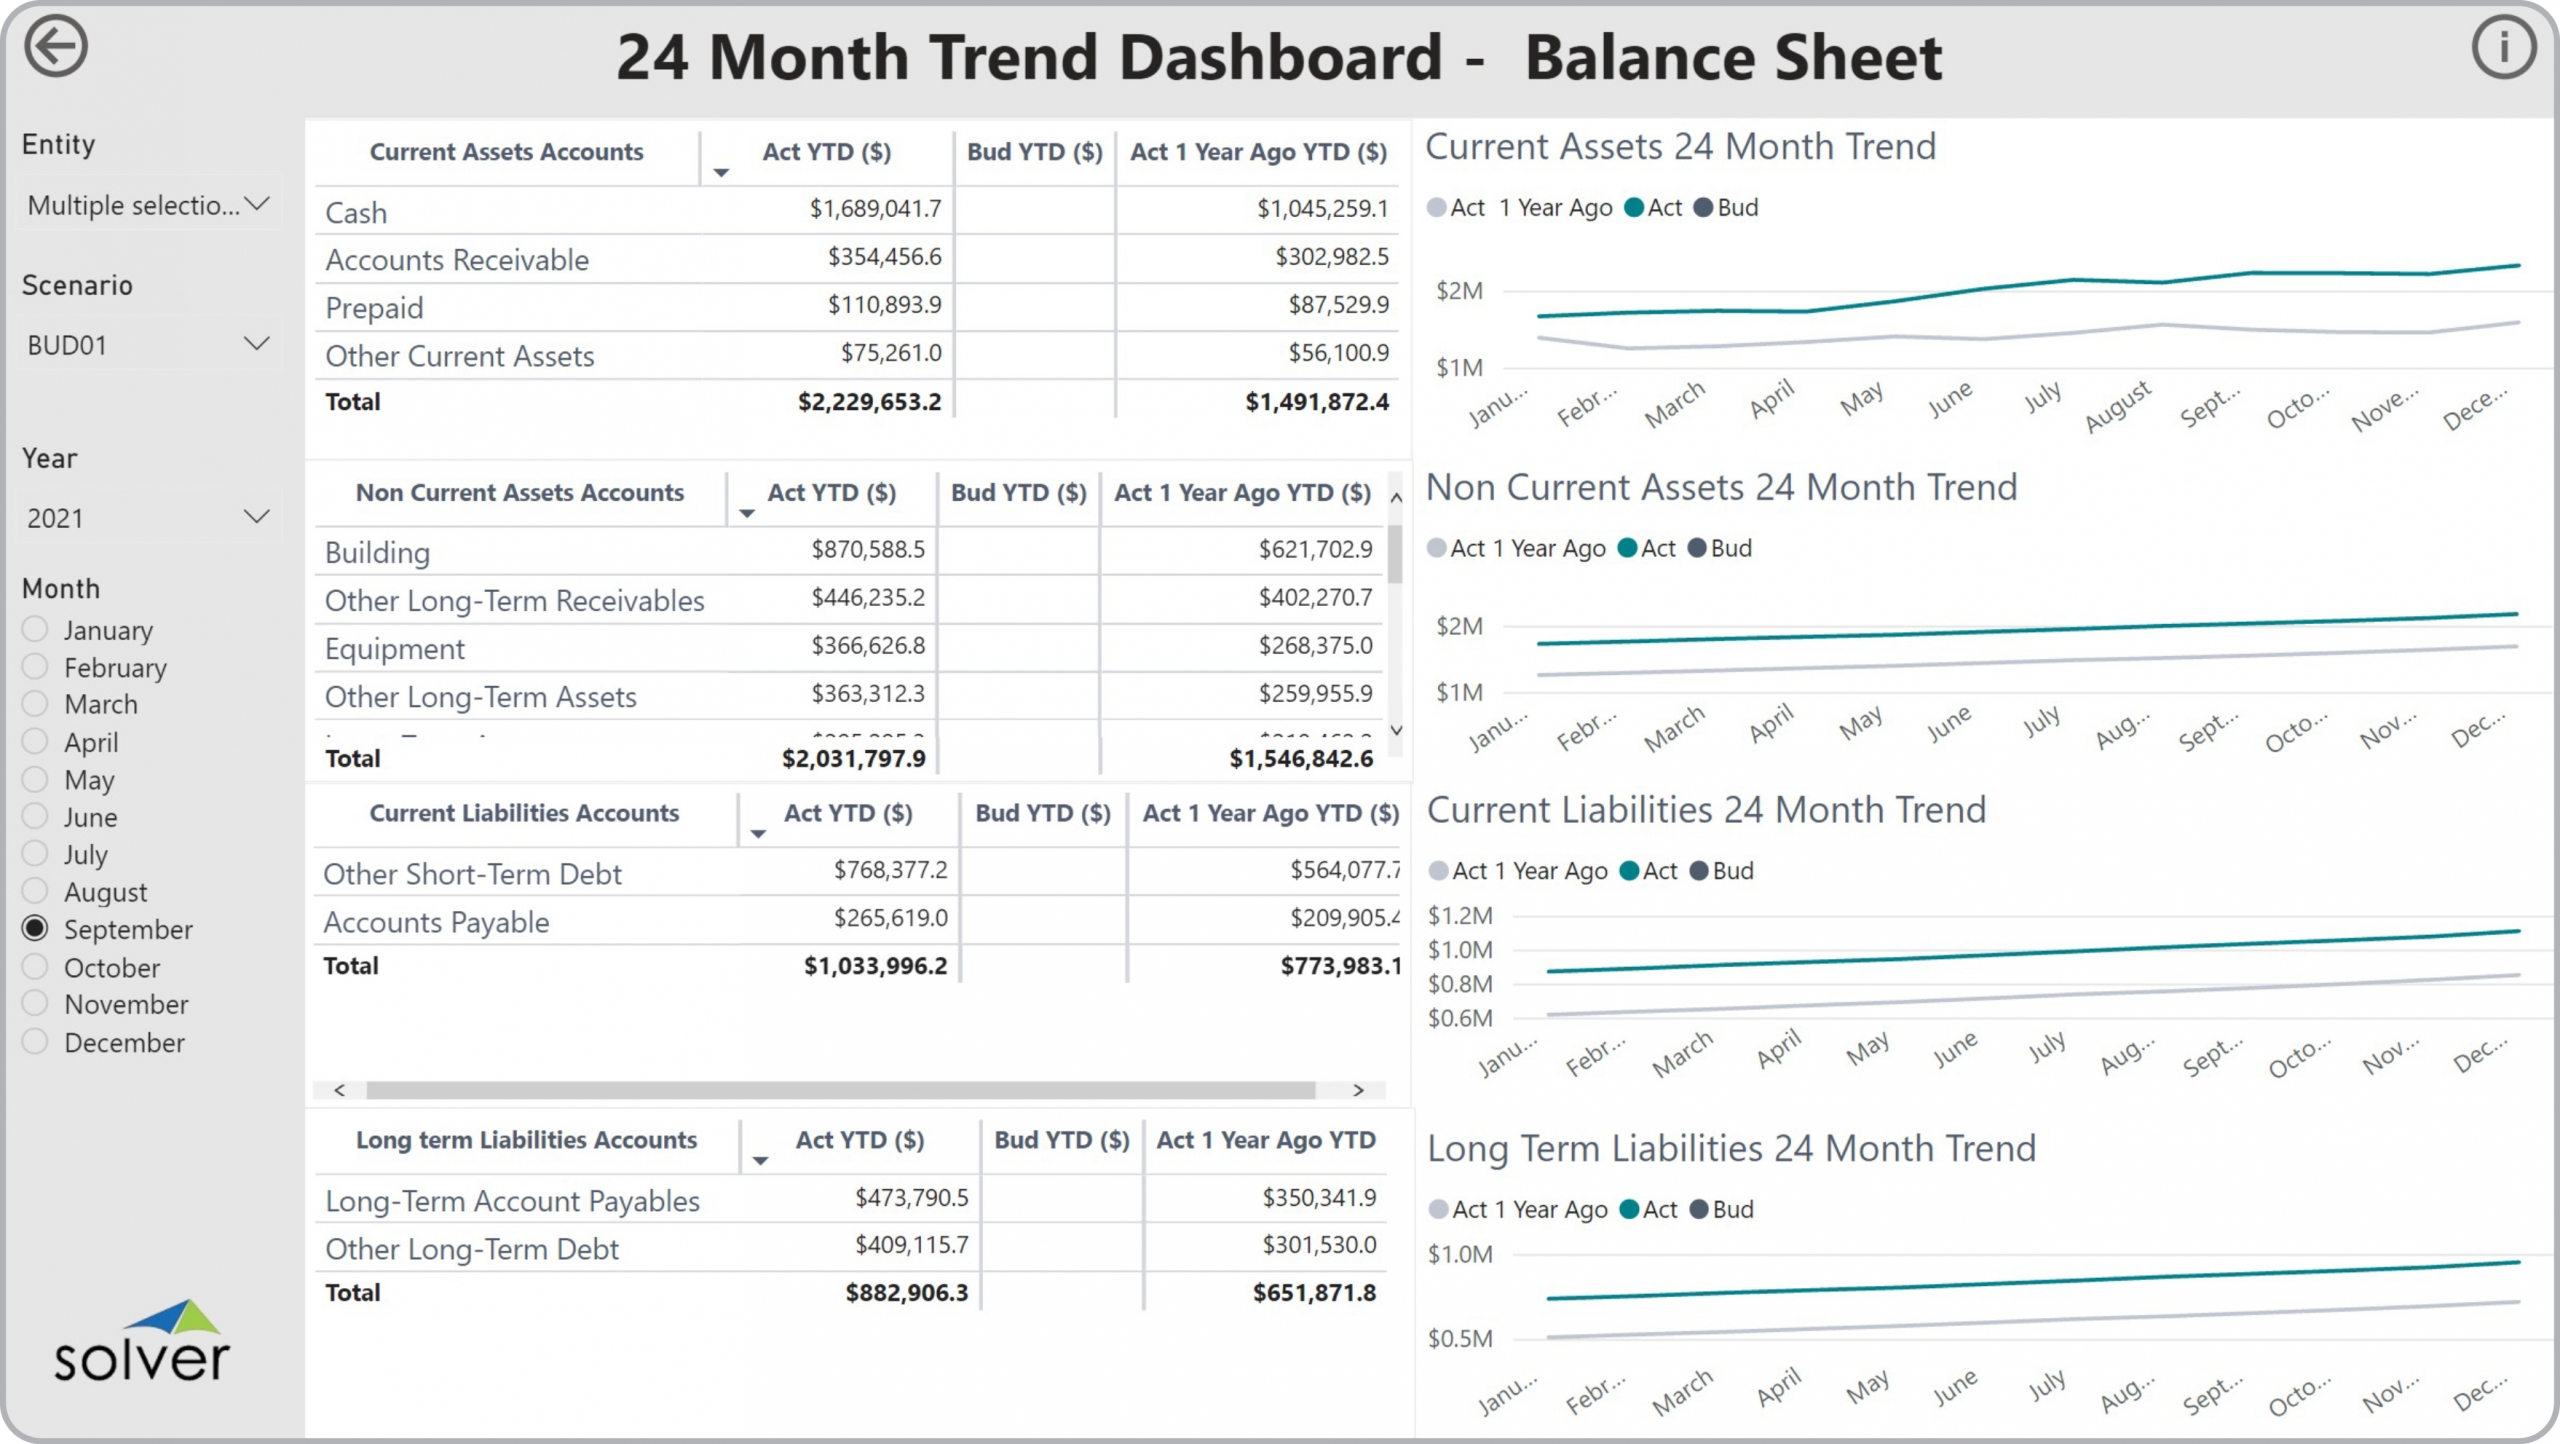 Example of an 24 Month Balance Sheet Trend Dashboard to Streamline the Monthly Reporting Process